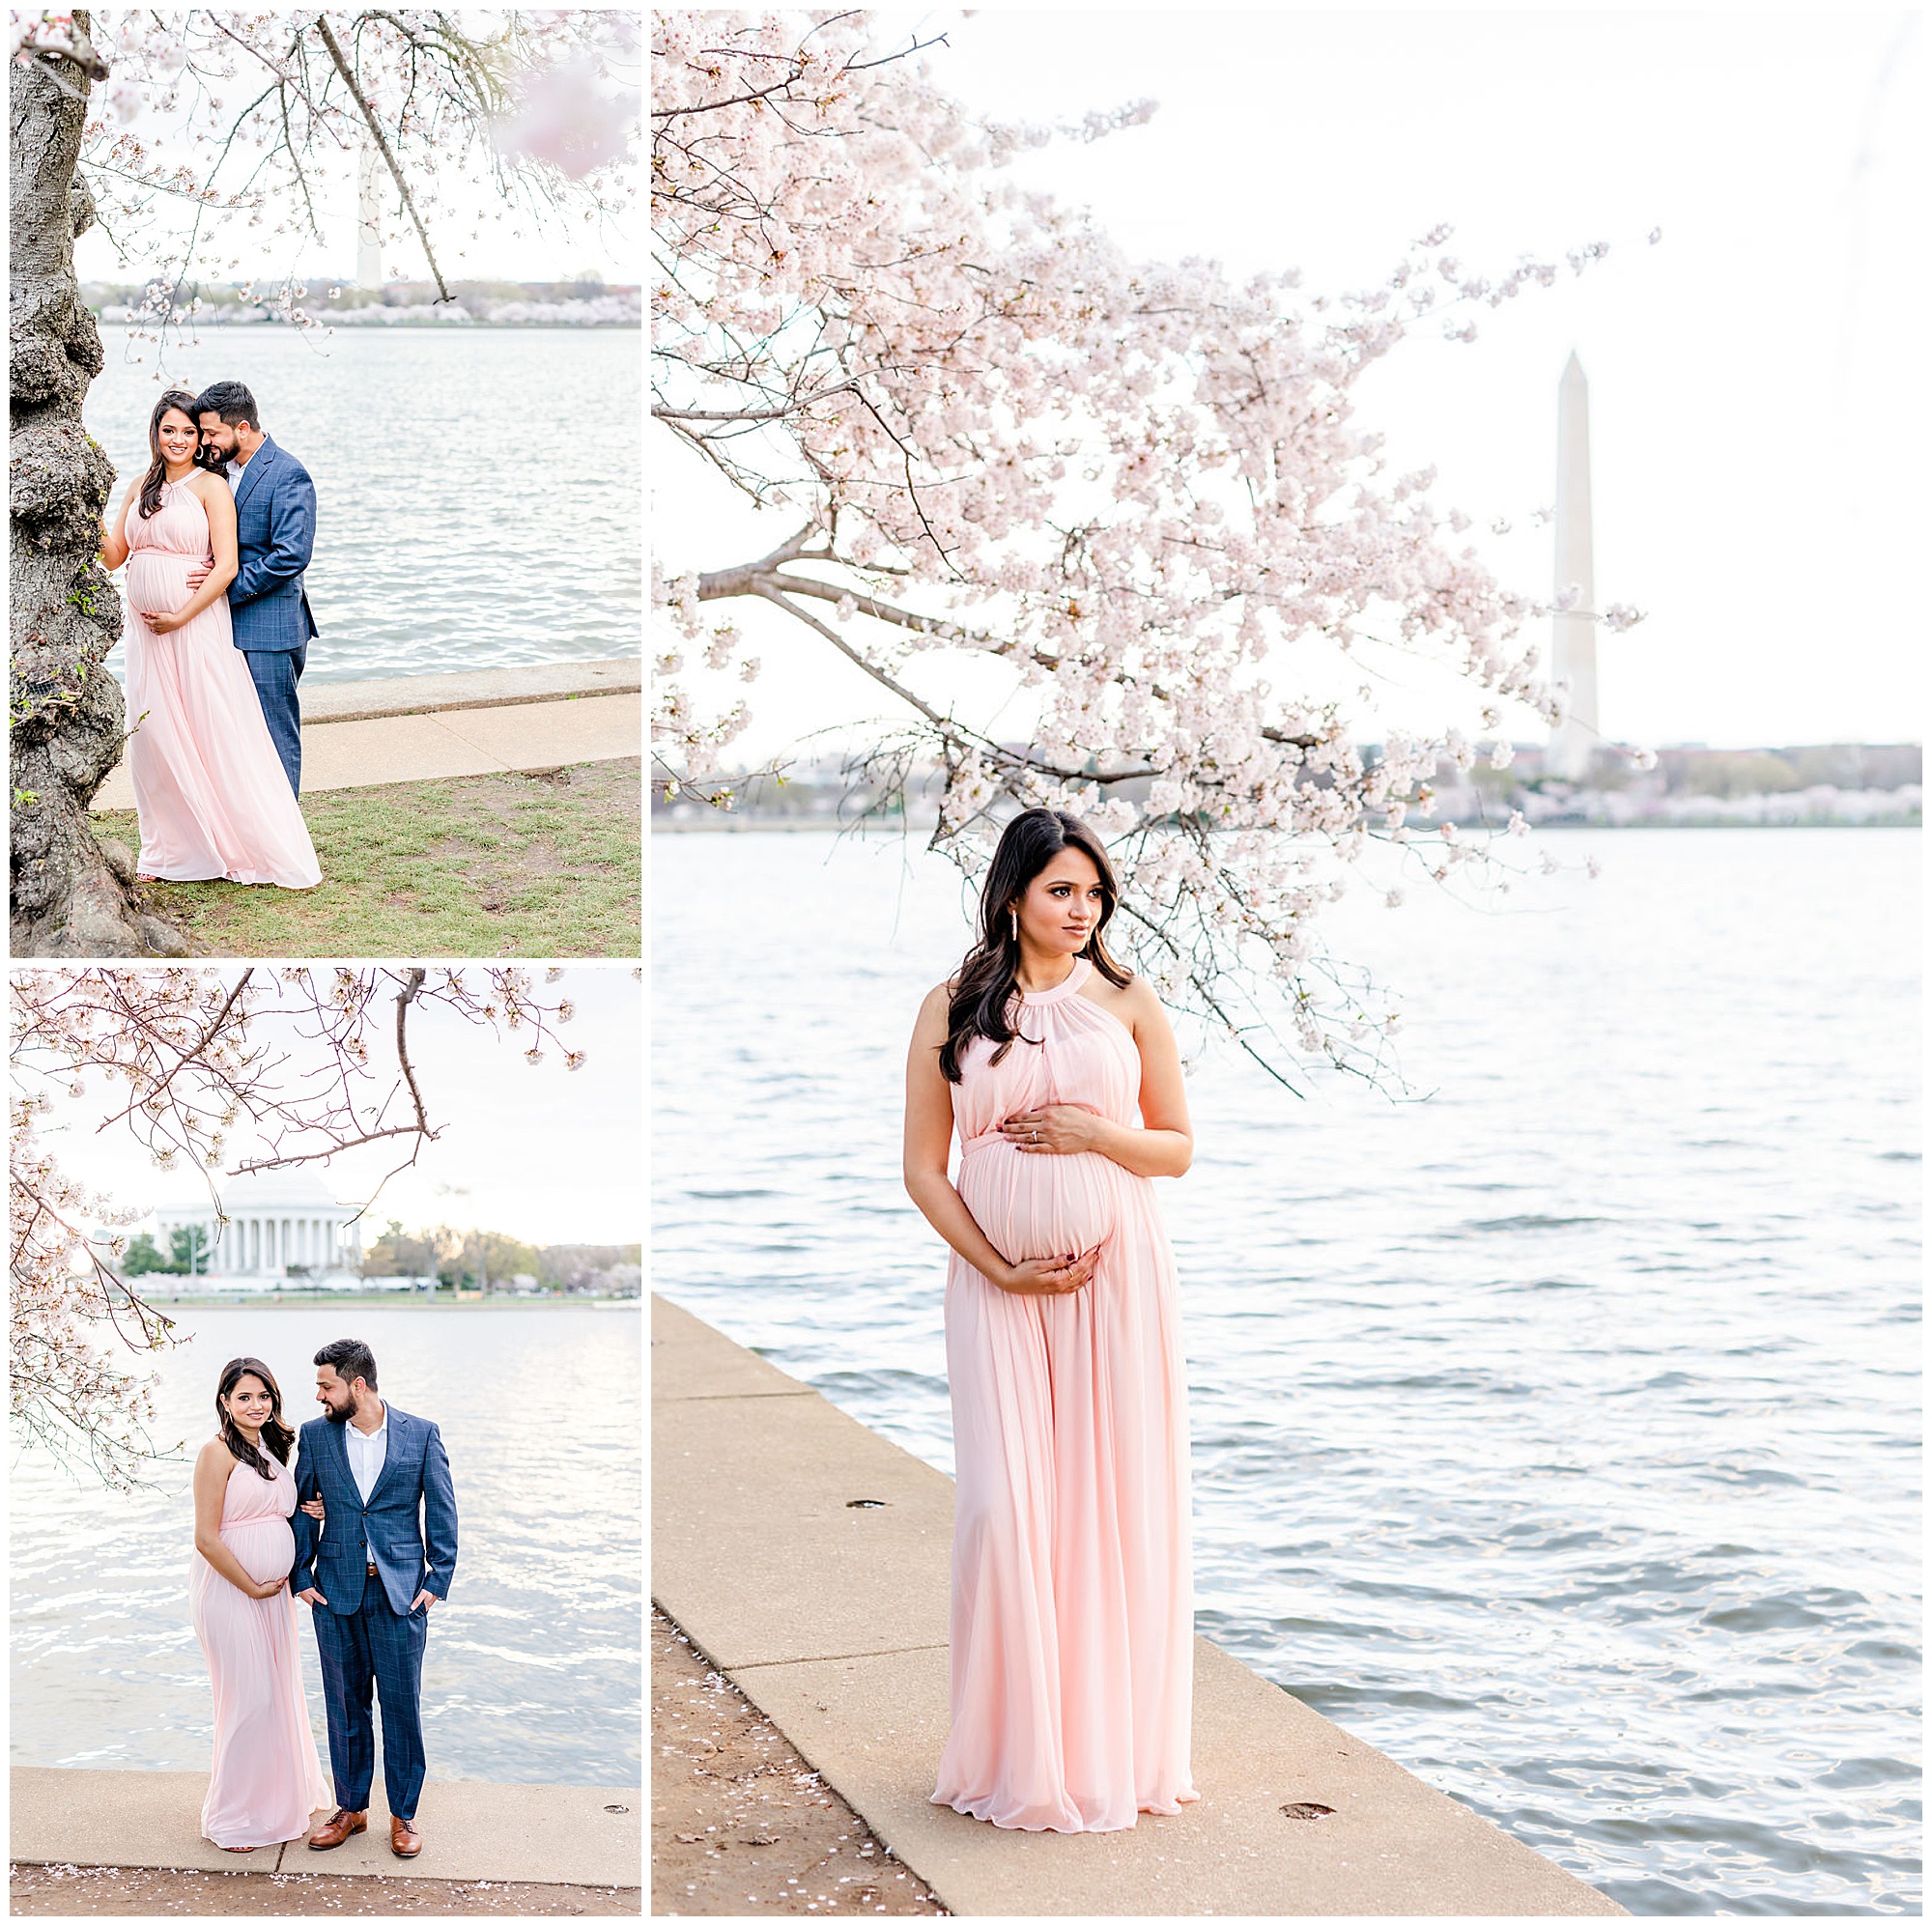 windy cherry blossoms maternity session, D.C. maternity photos, cherry blossoms maternity photos, D.C. portraits, D.C. cherry blossoms portraits, Tidal Basin Washington D.C., D.C. maternity photographer, D.C. photographer, spring portratis, Rachel E.H. Photography, woman holding baby bump, pink dress, woman holding mans arm